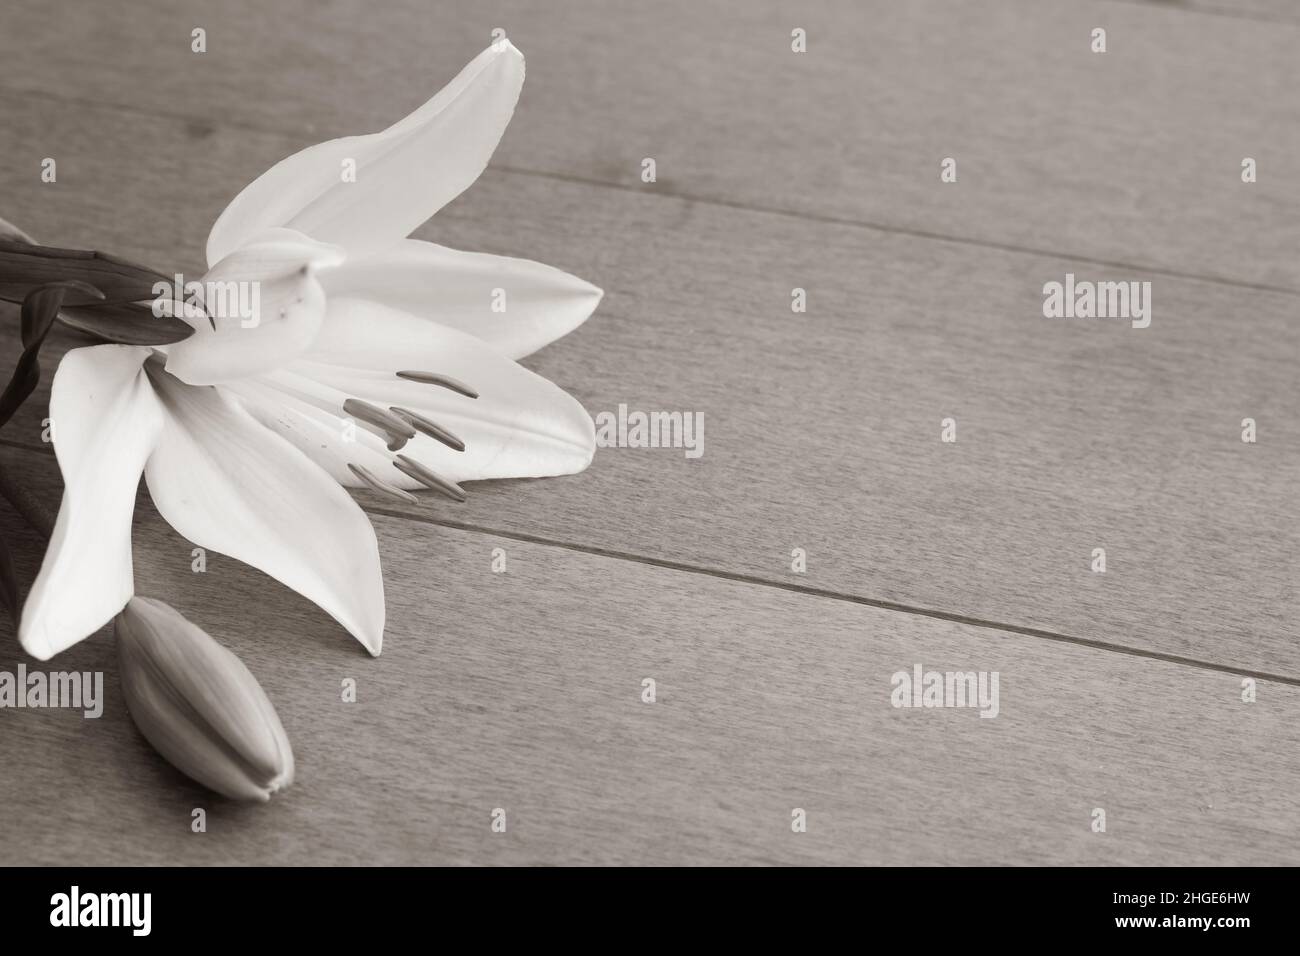 Single white lily on a light wood background with copy space Stock Photo